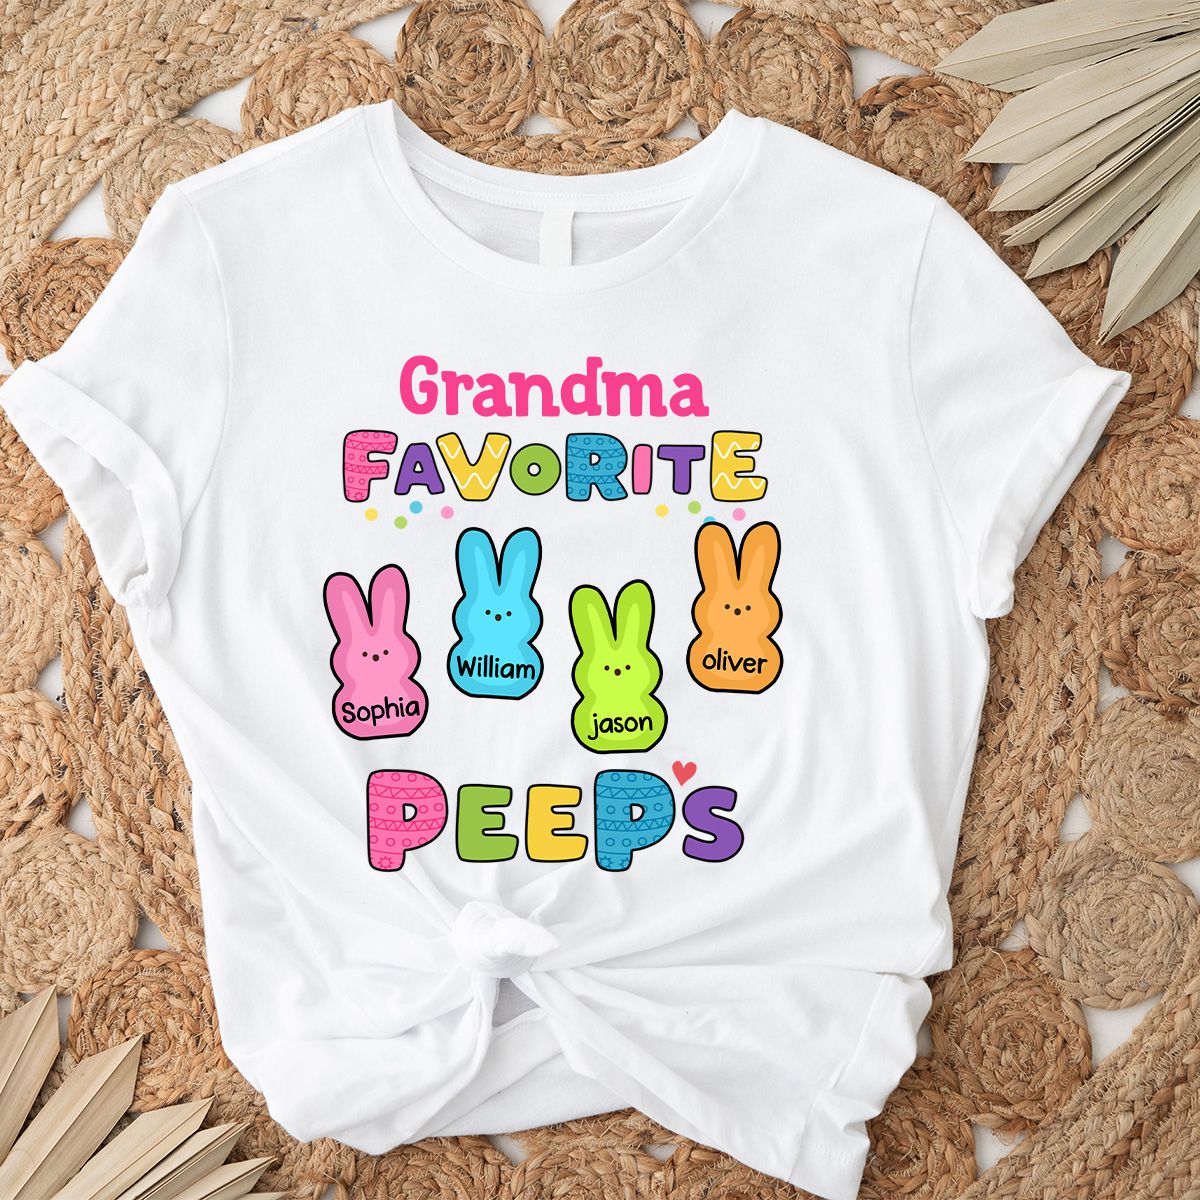 Personalized Grandma Easter Pure cotton T-shirt